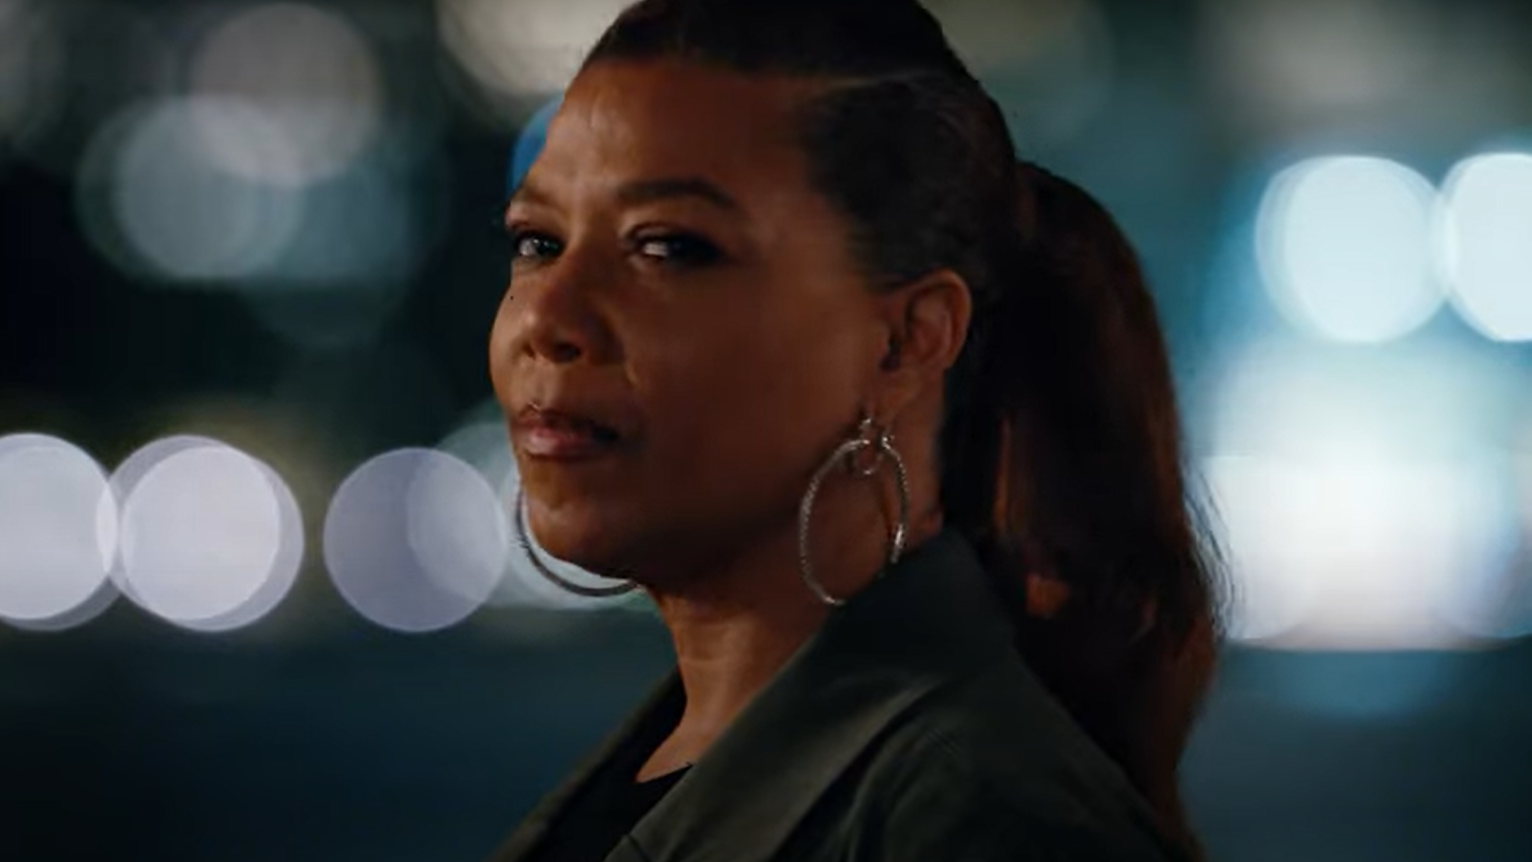 ‘The Equalizer’ season two trailer heralds the return of Queen Latifah